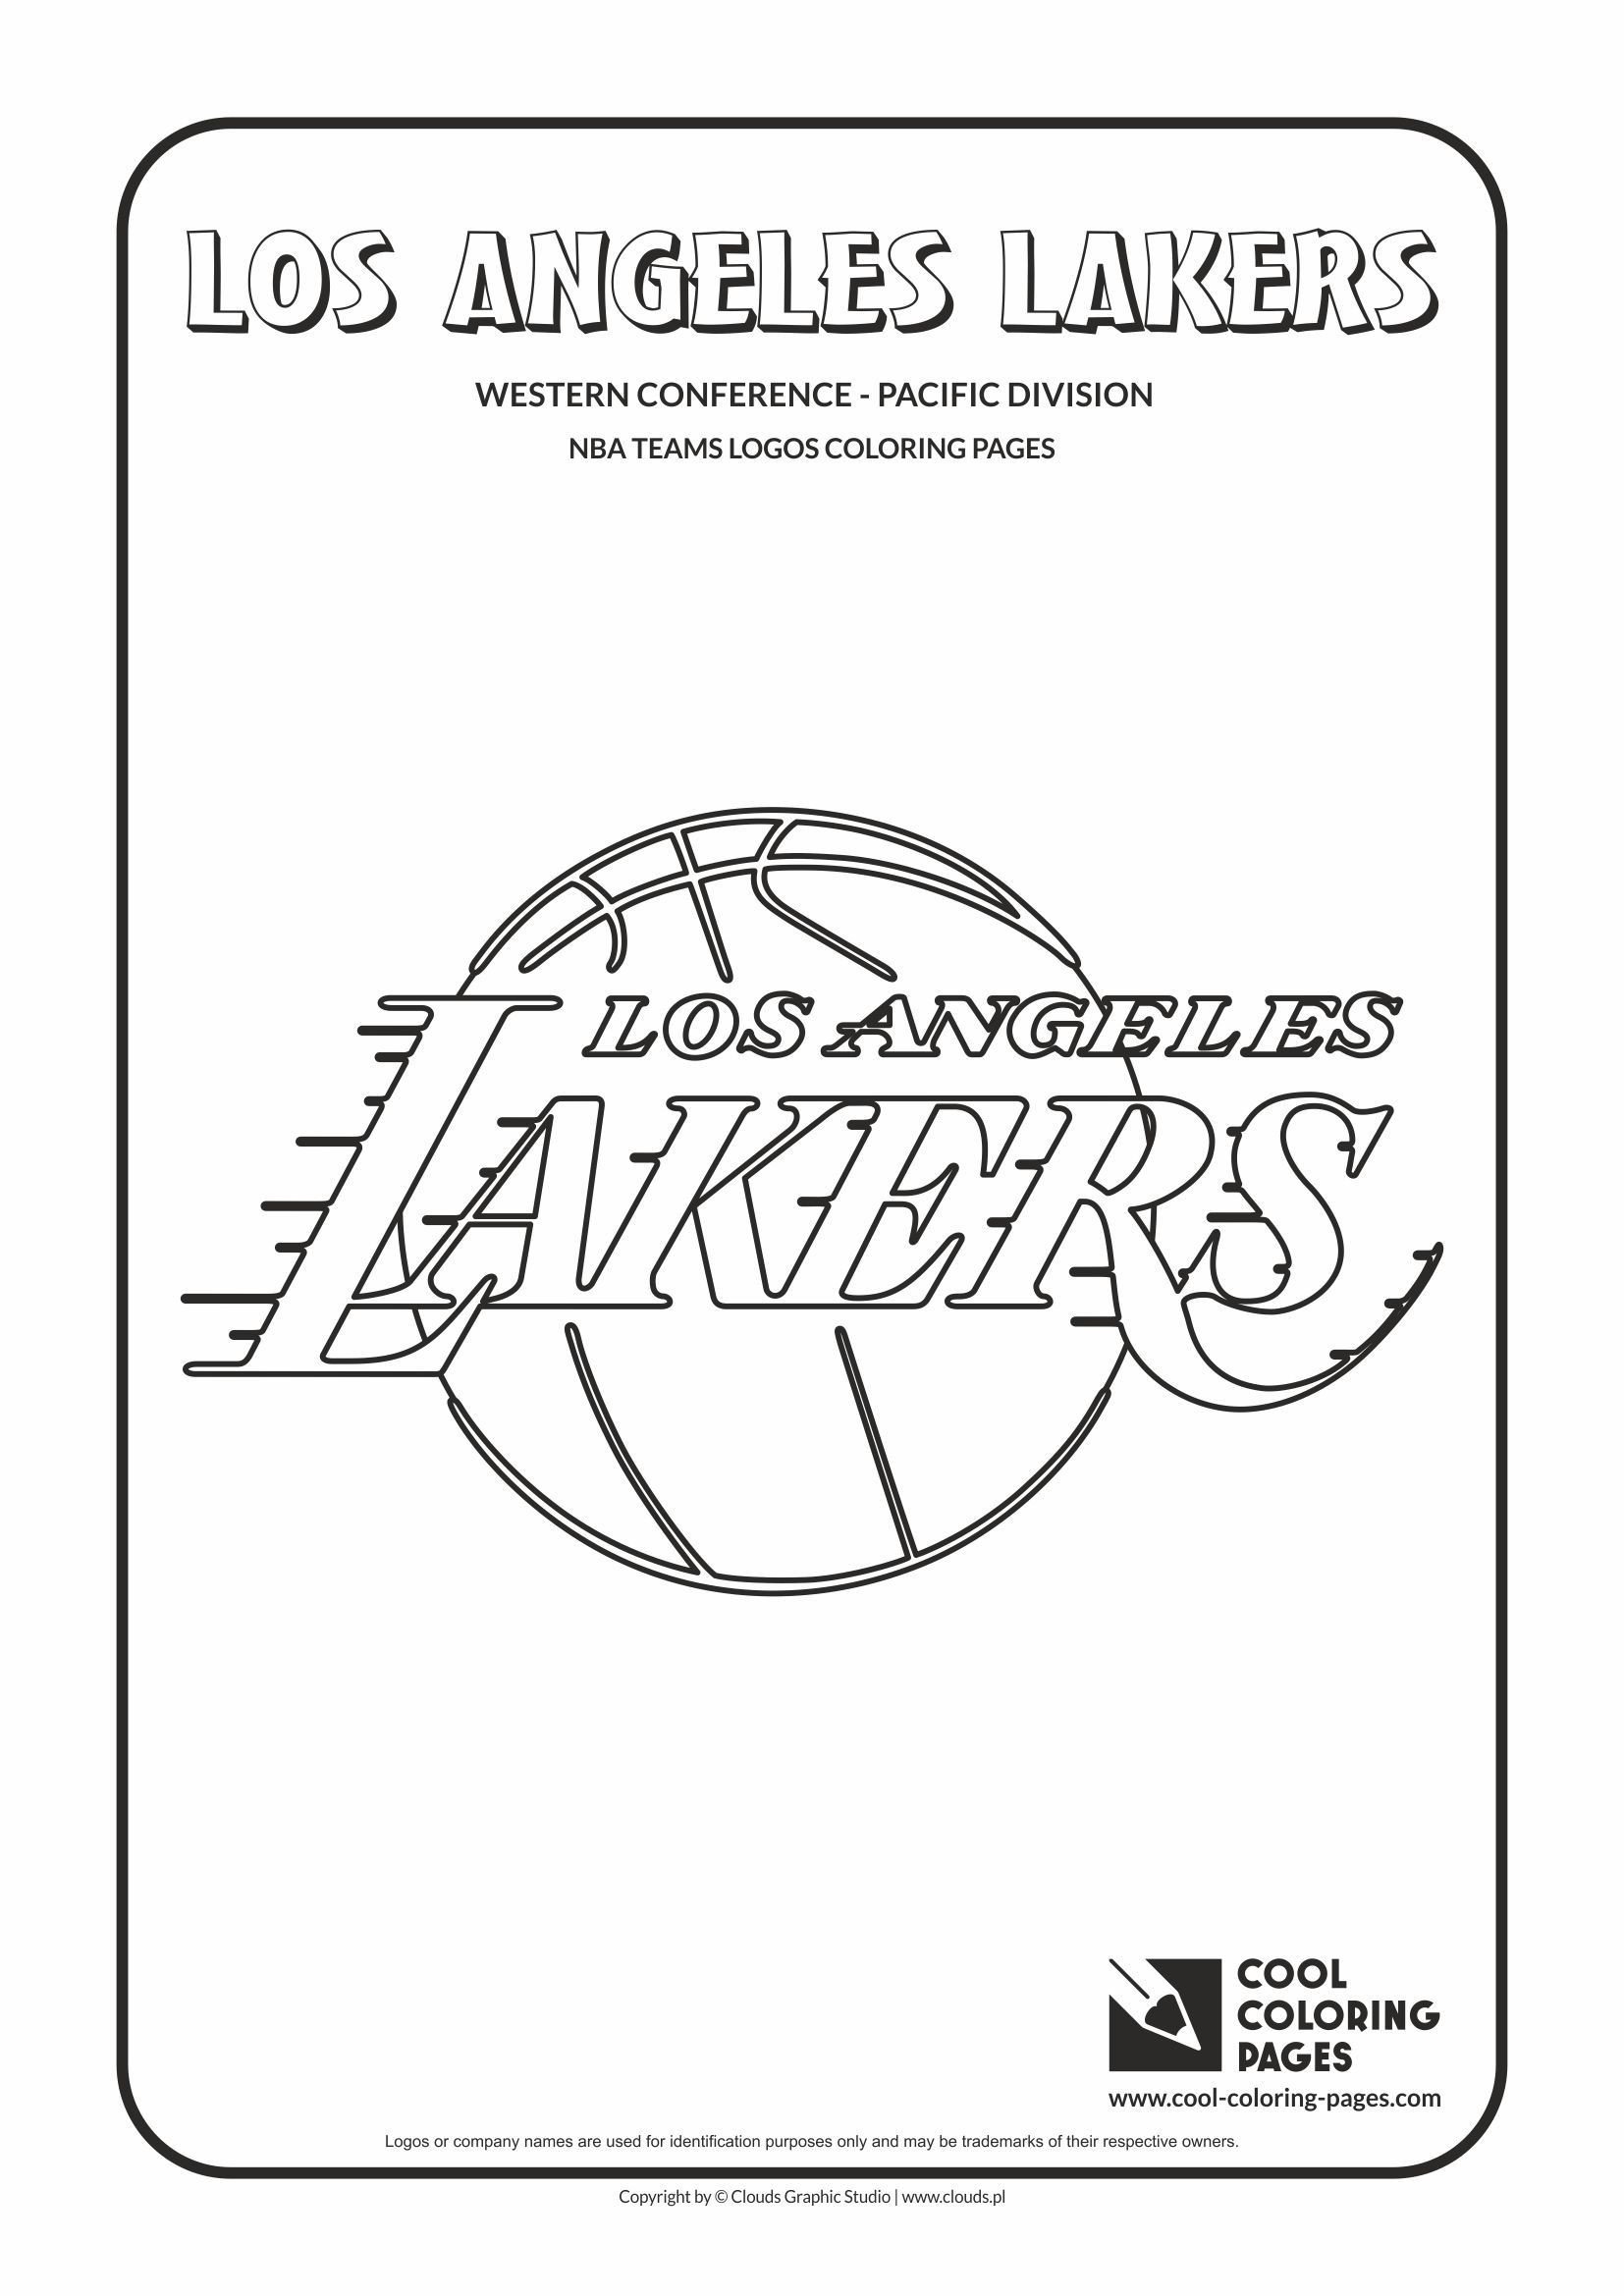 Coloring Pages For Boys Lakers
 Cool Coloring Pages NBA Basketball Clubs Logos Western